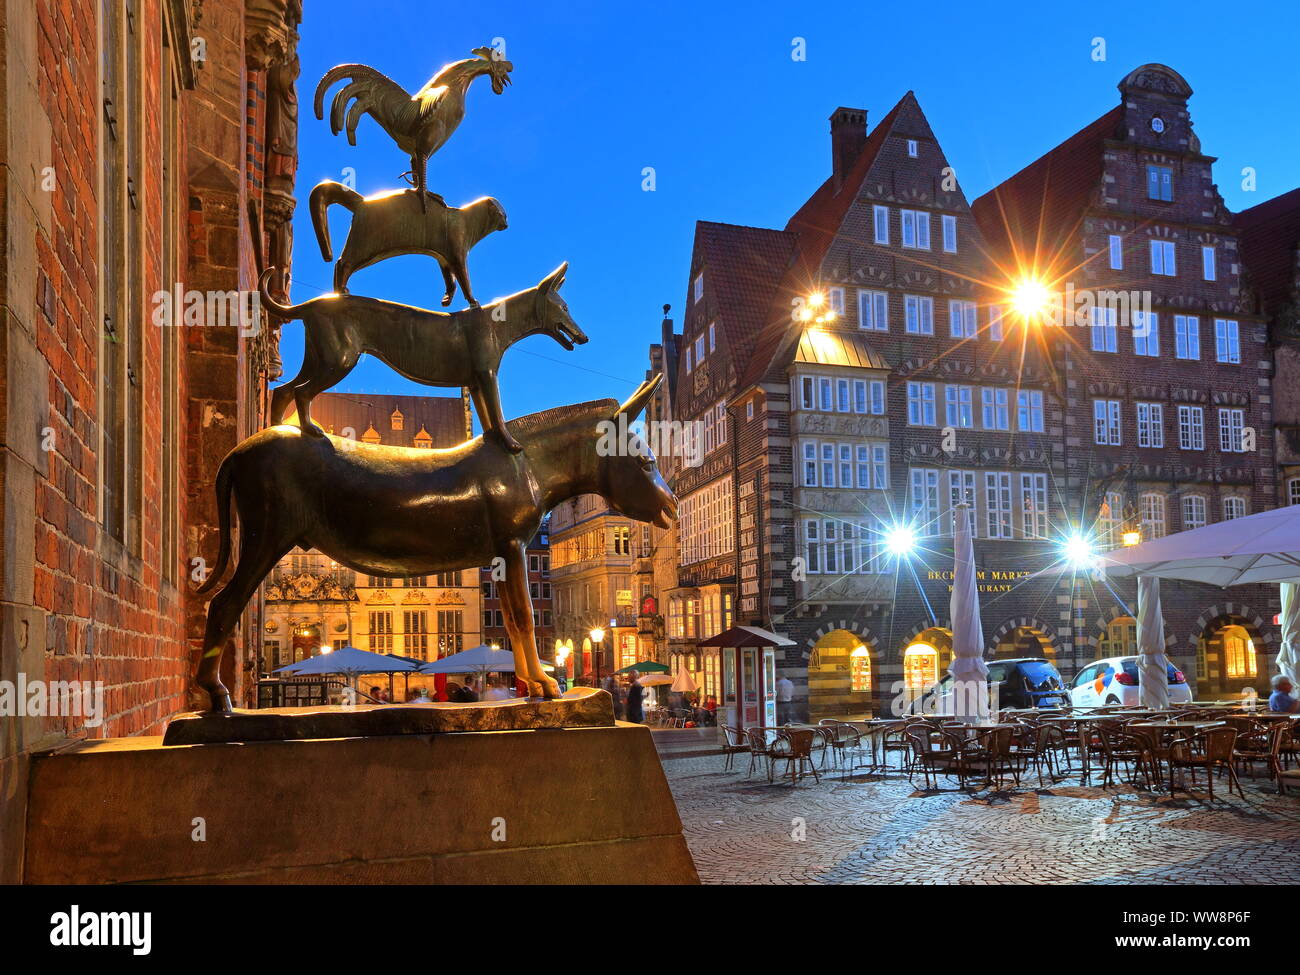 Sculpture group Bremer Stadtmusikanten am Rathaus, Bremen, State of Bremen, Northern Germany, Germany Stock Photo